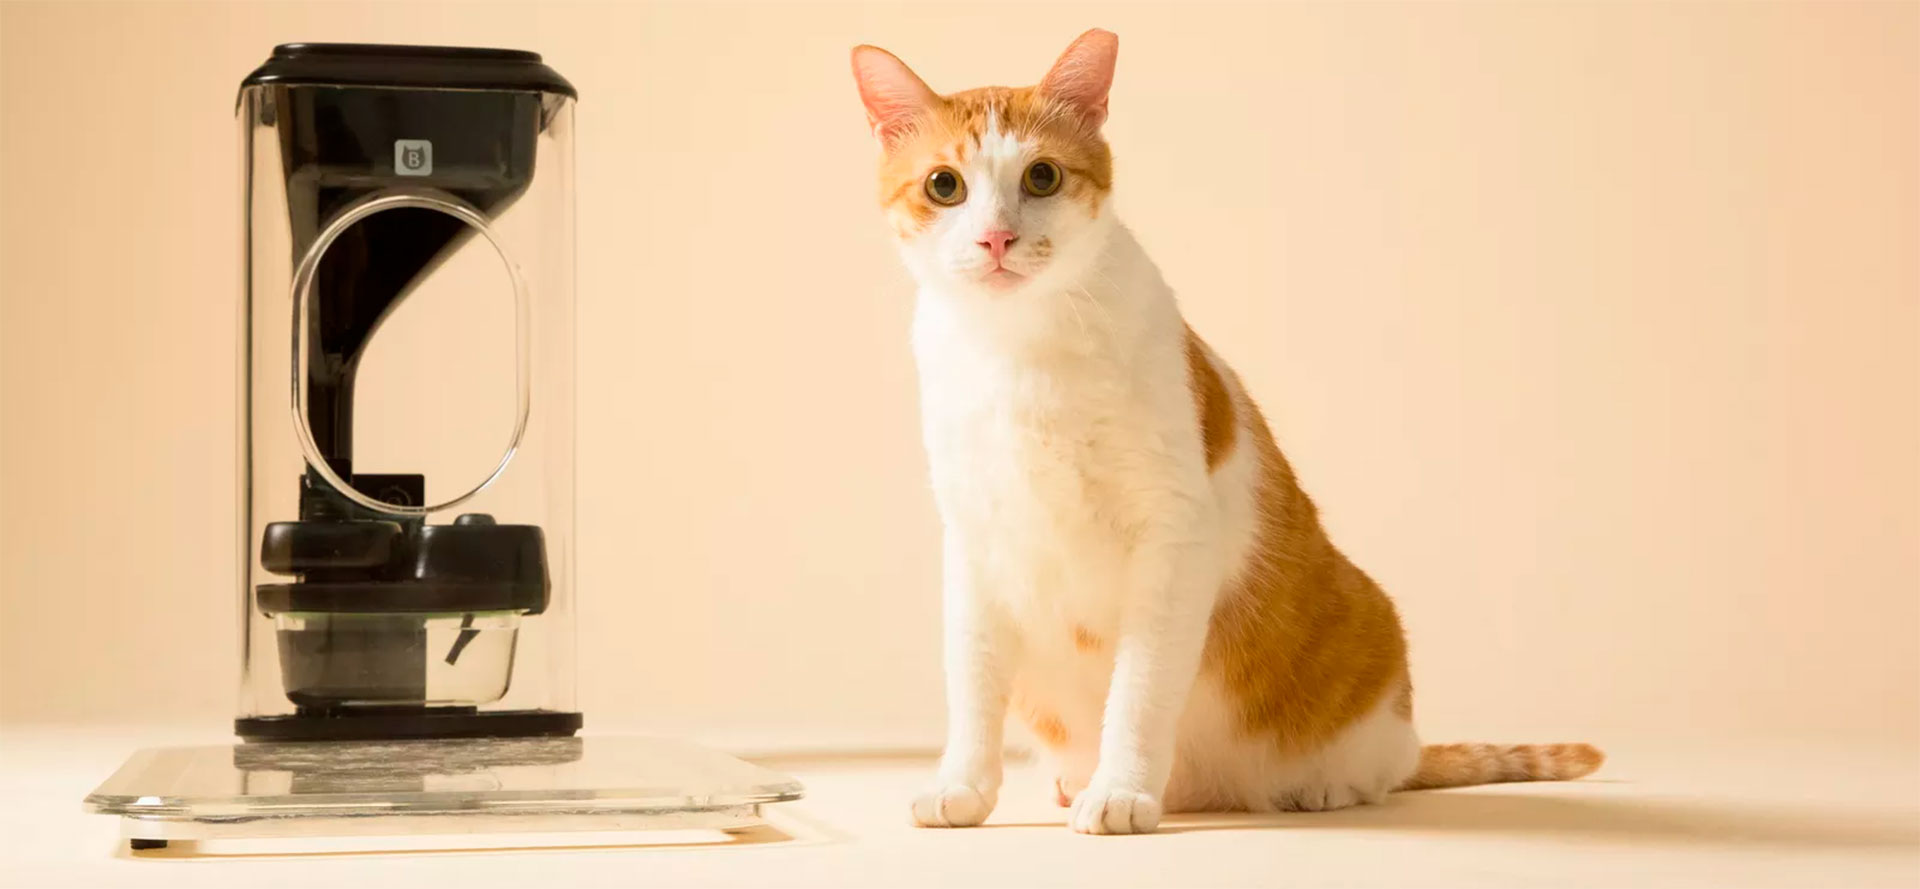 Dry Food Automatic Cat Feeder.